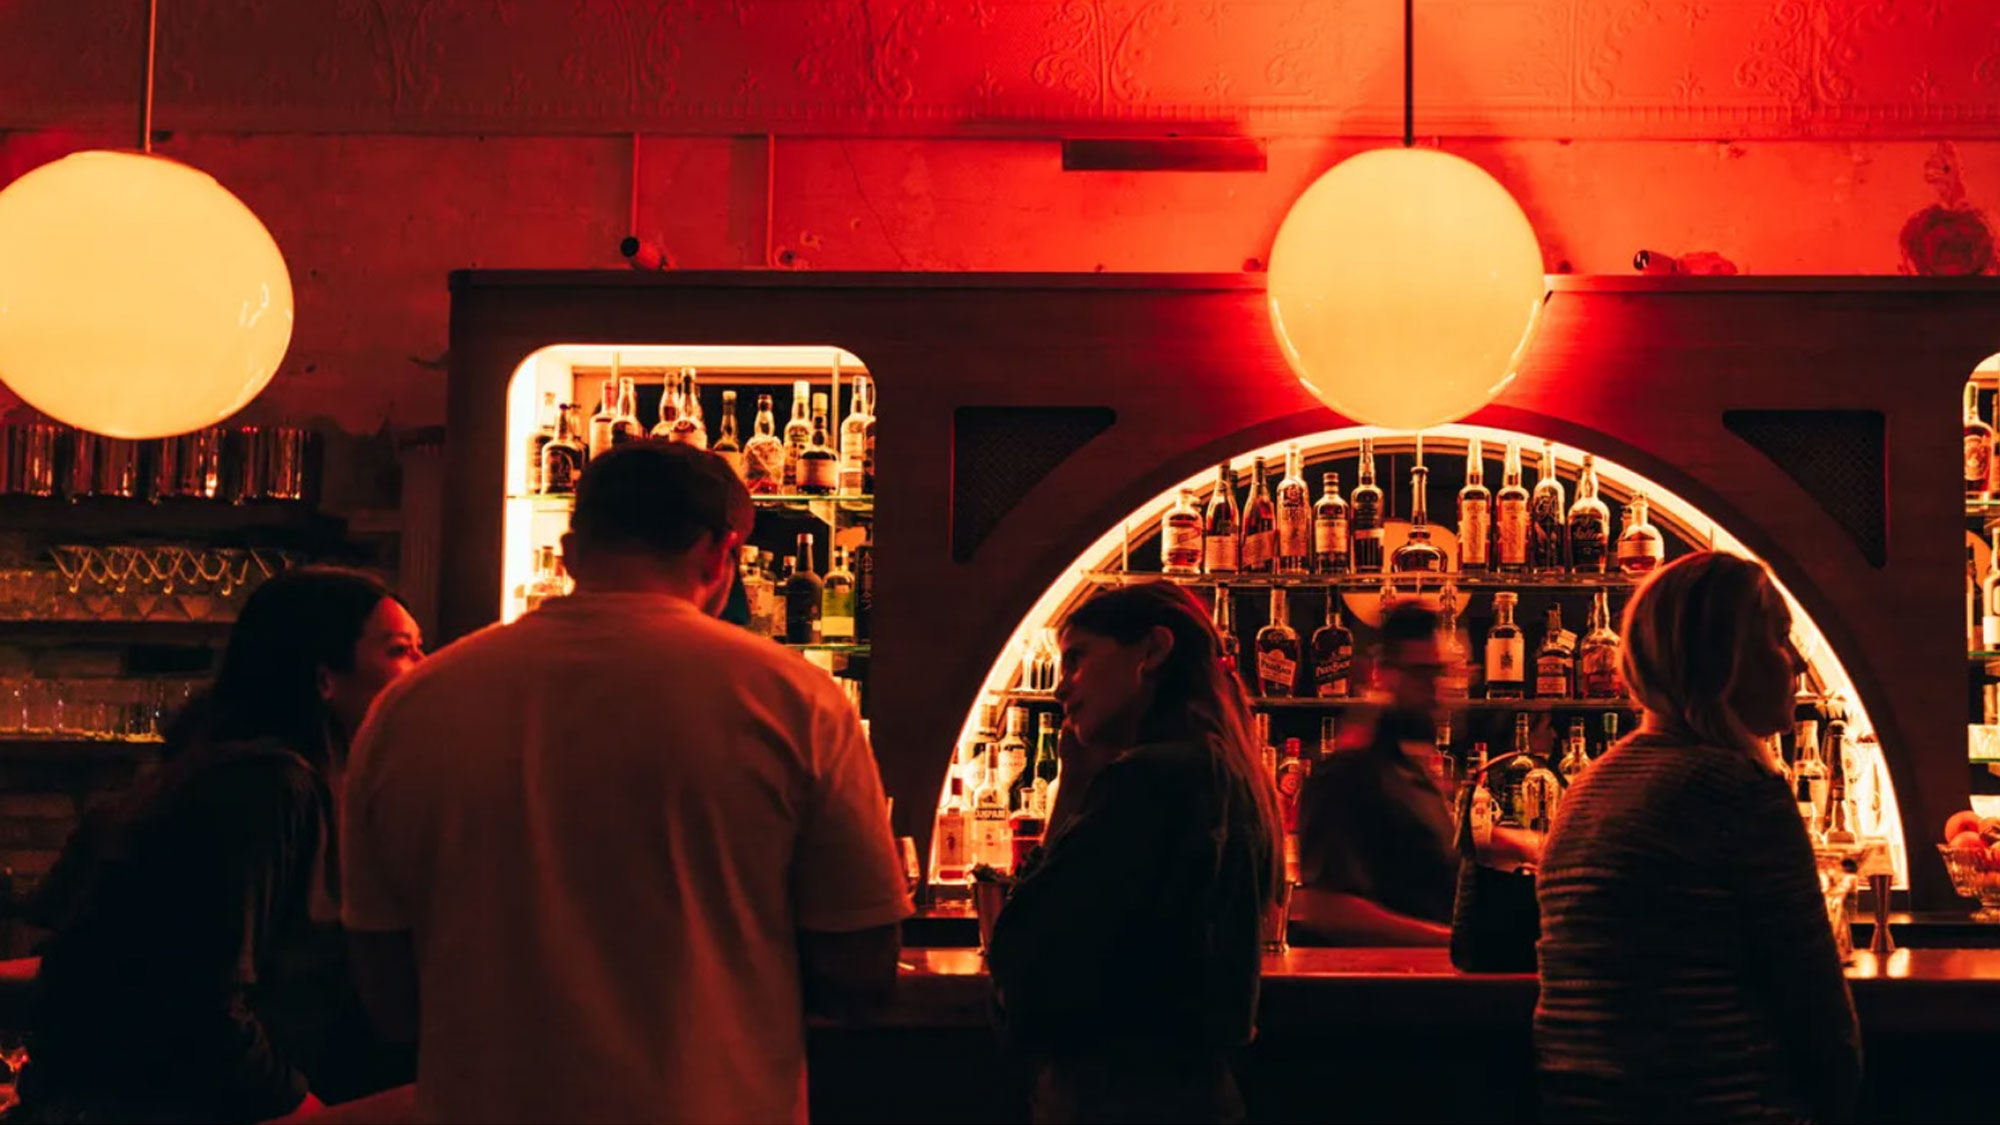 A late night bar with glowing red lights and special drinks